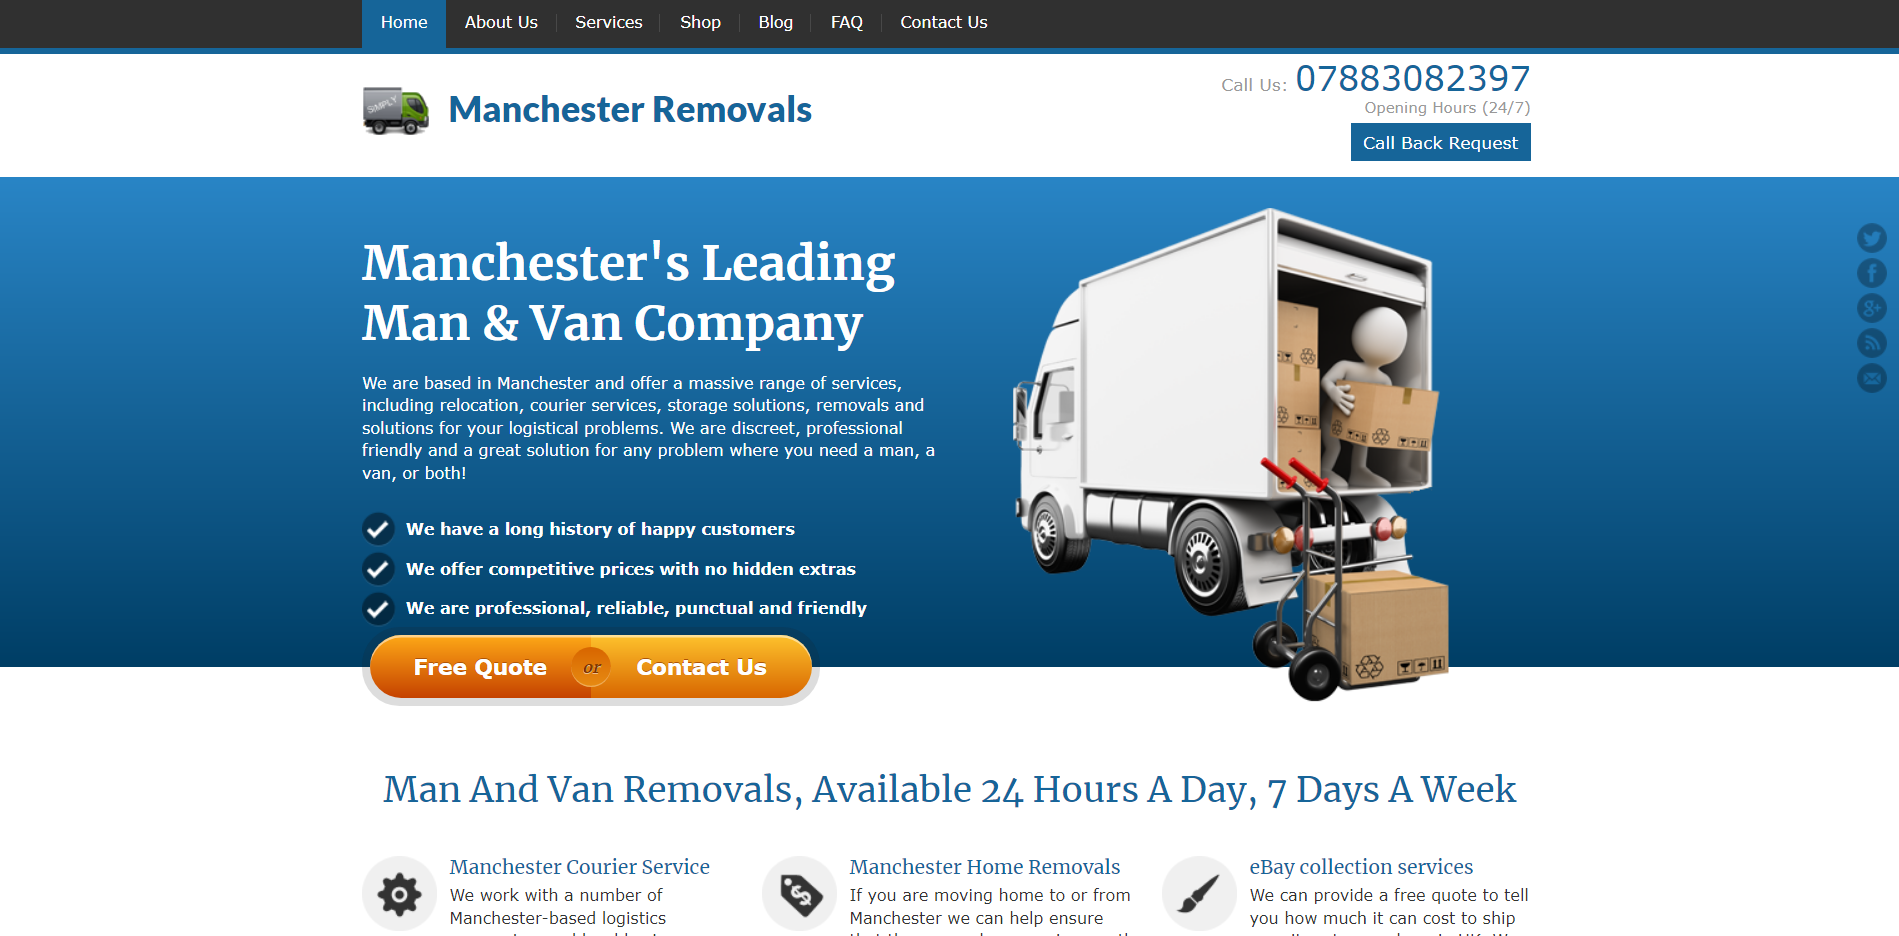 Manchester Removals